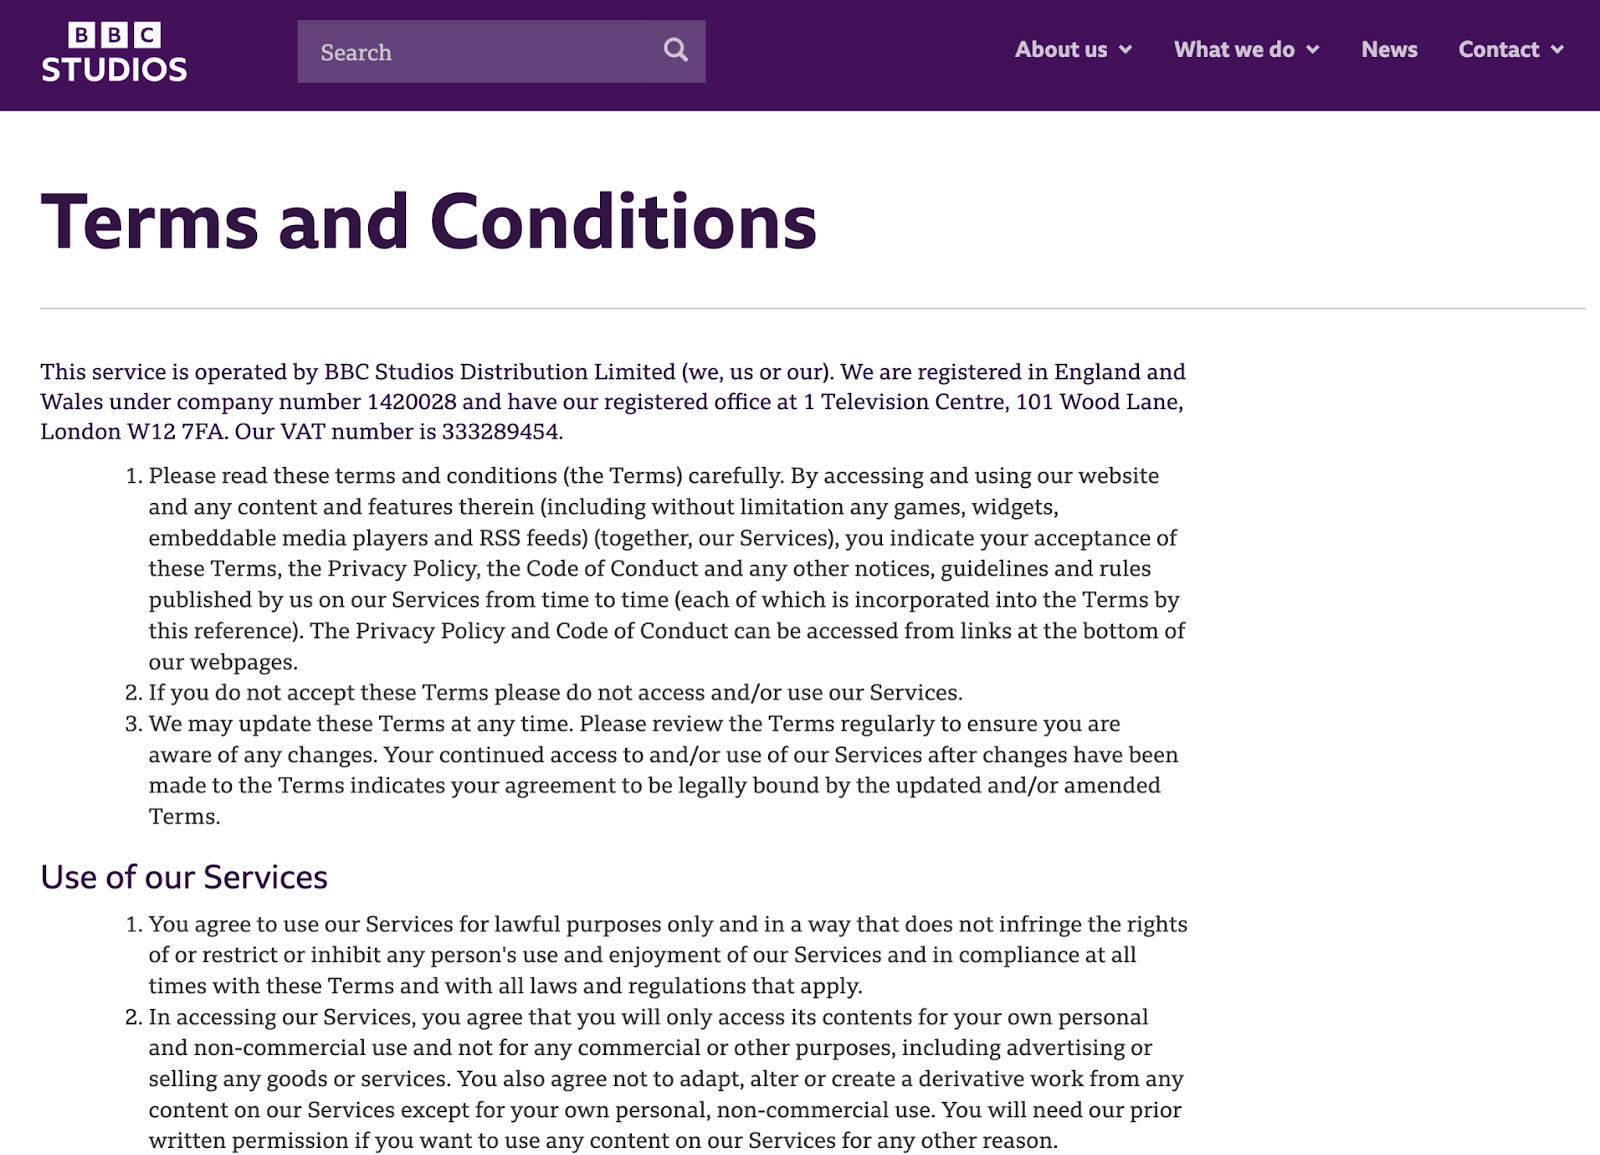 terms and conditions example for BBC